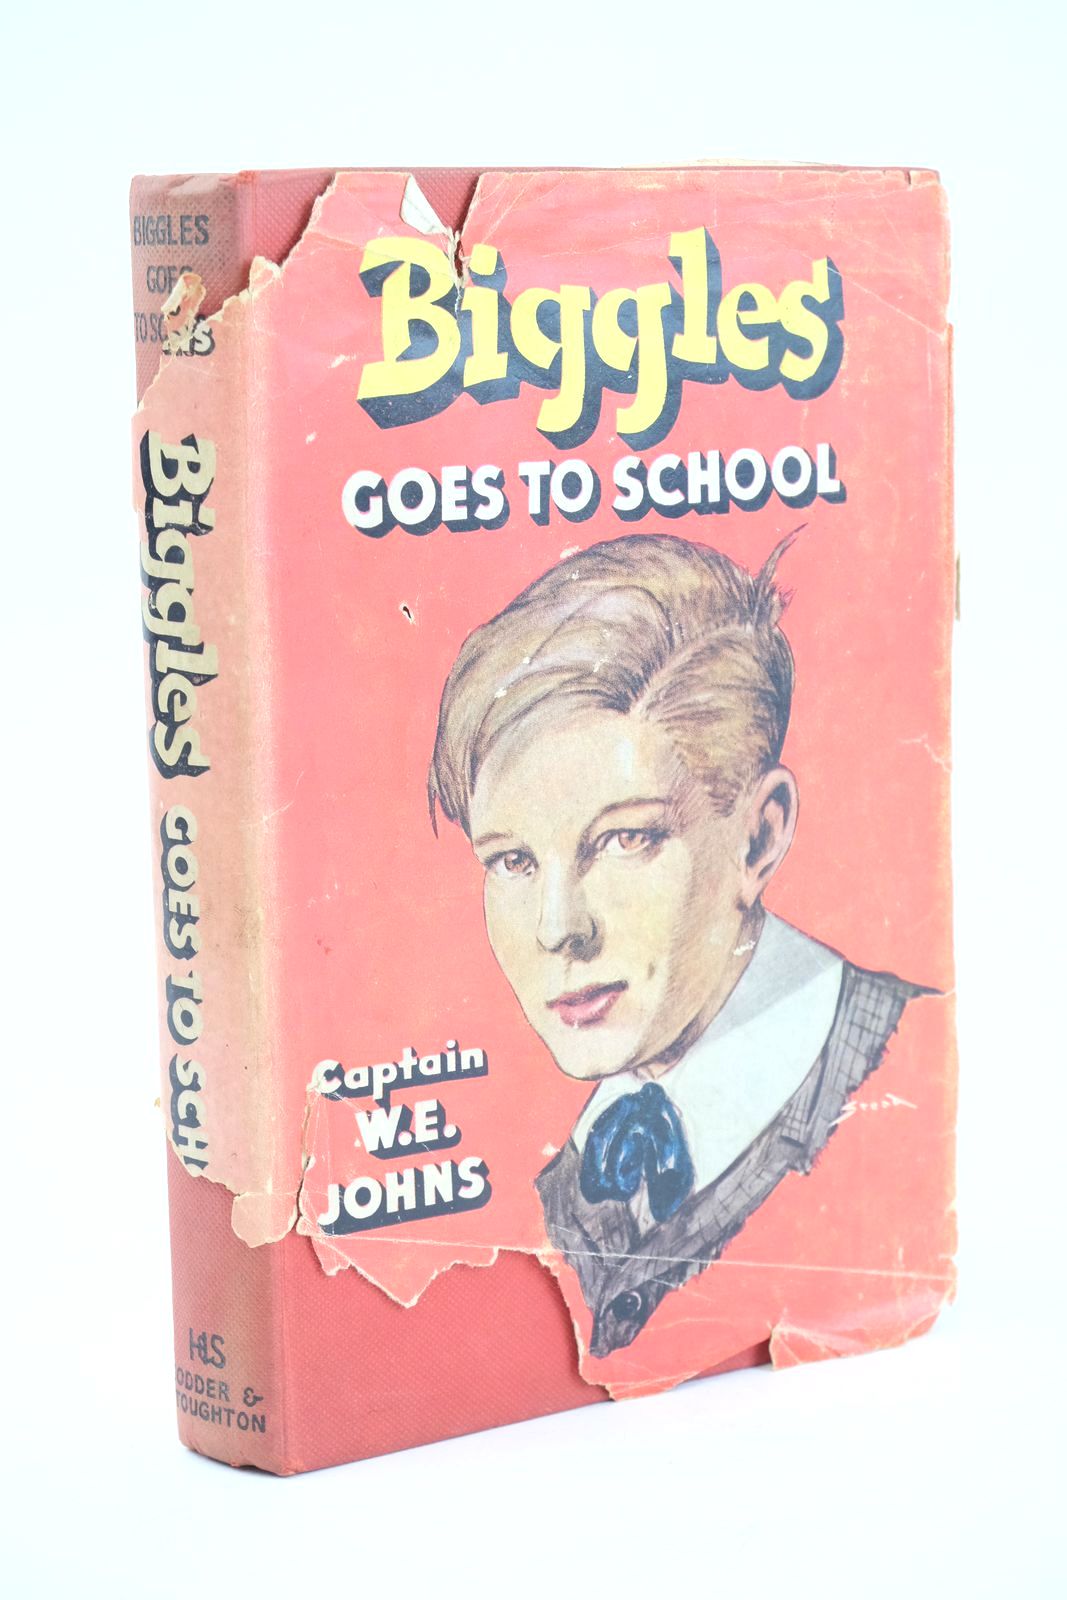 Photo of BIGGLES GOES TO SCHOOL written by Johns, W.E. illustrated by Stead,  published by Hodder & Stoughton (STOCK CODE: 1323916)  for sale by Stella & Rose's Books